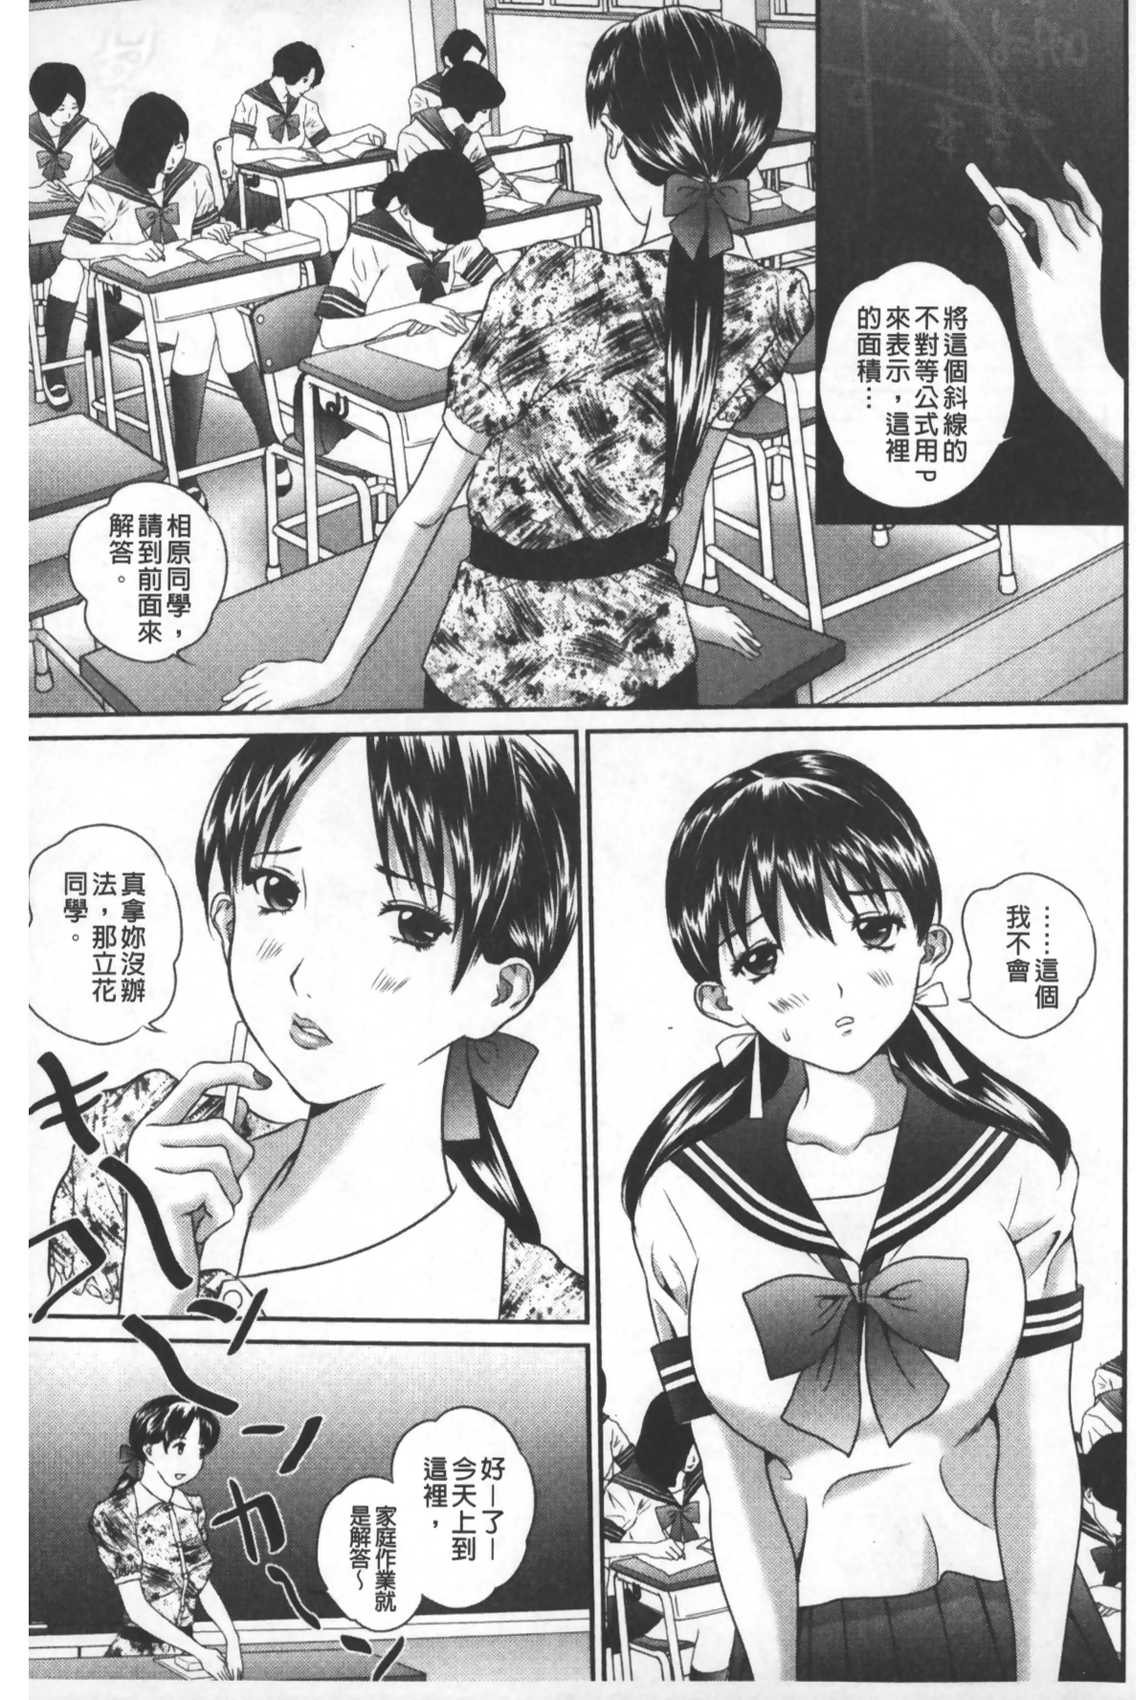 [Manzou] Tousatsu Collector | 盜拍題材精選集 [Chinese] page 42 full